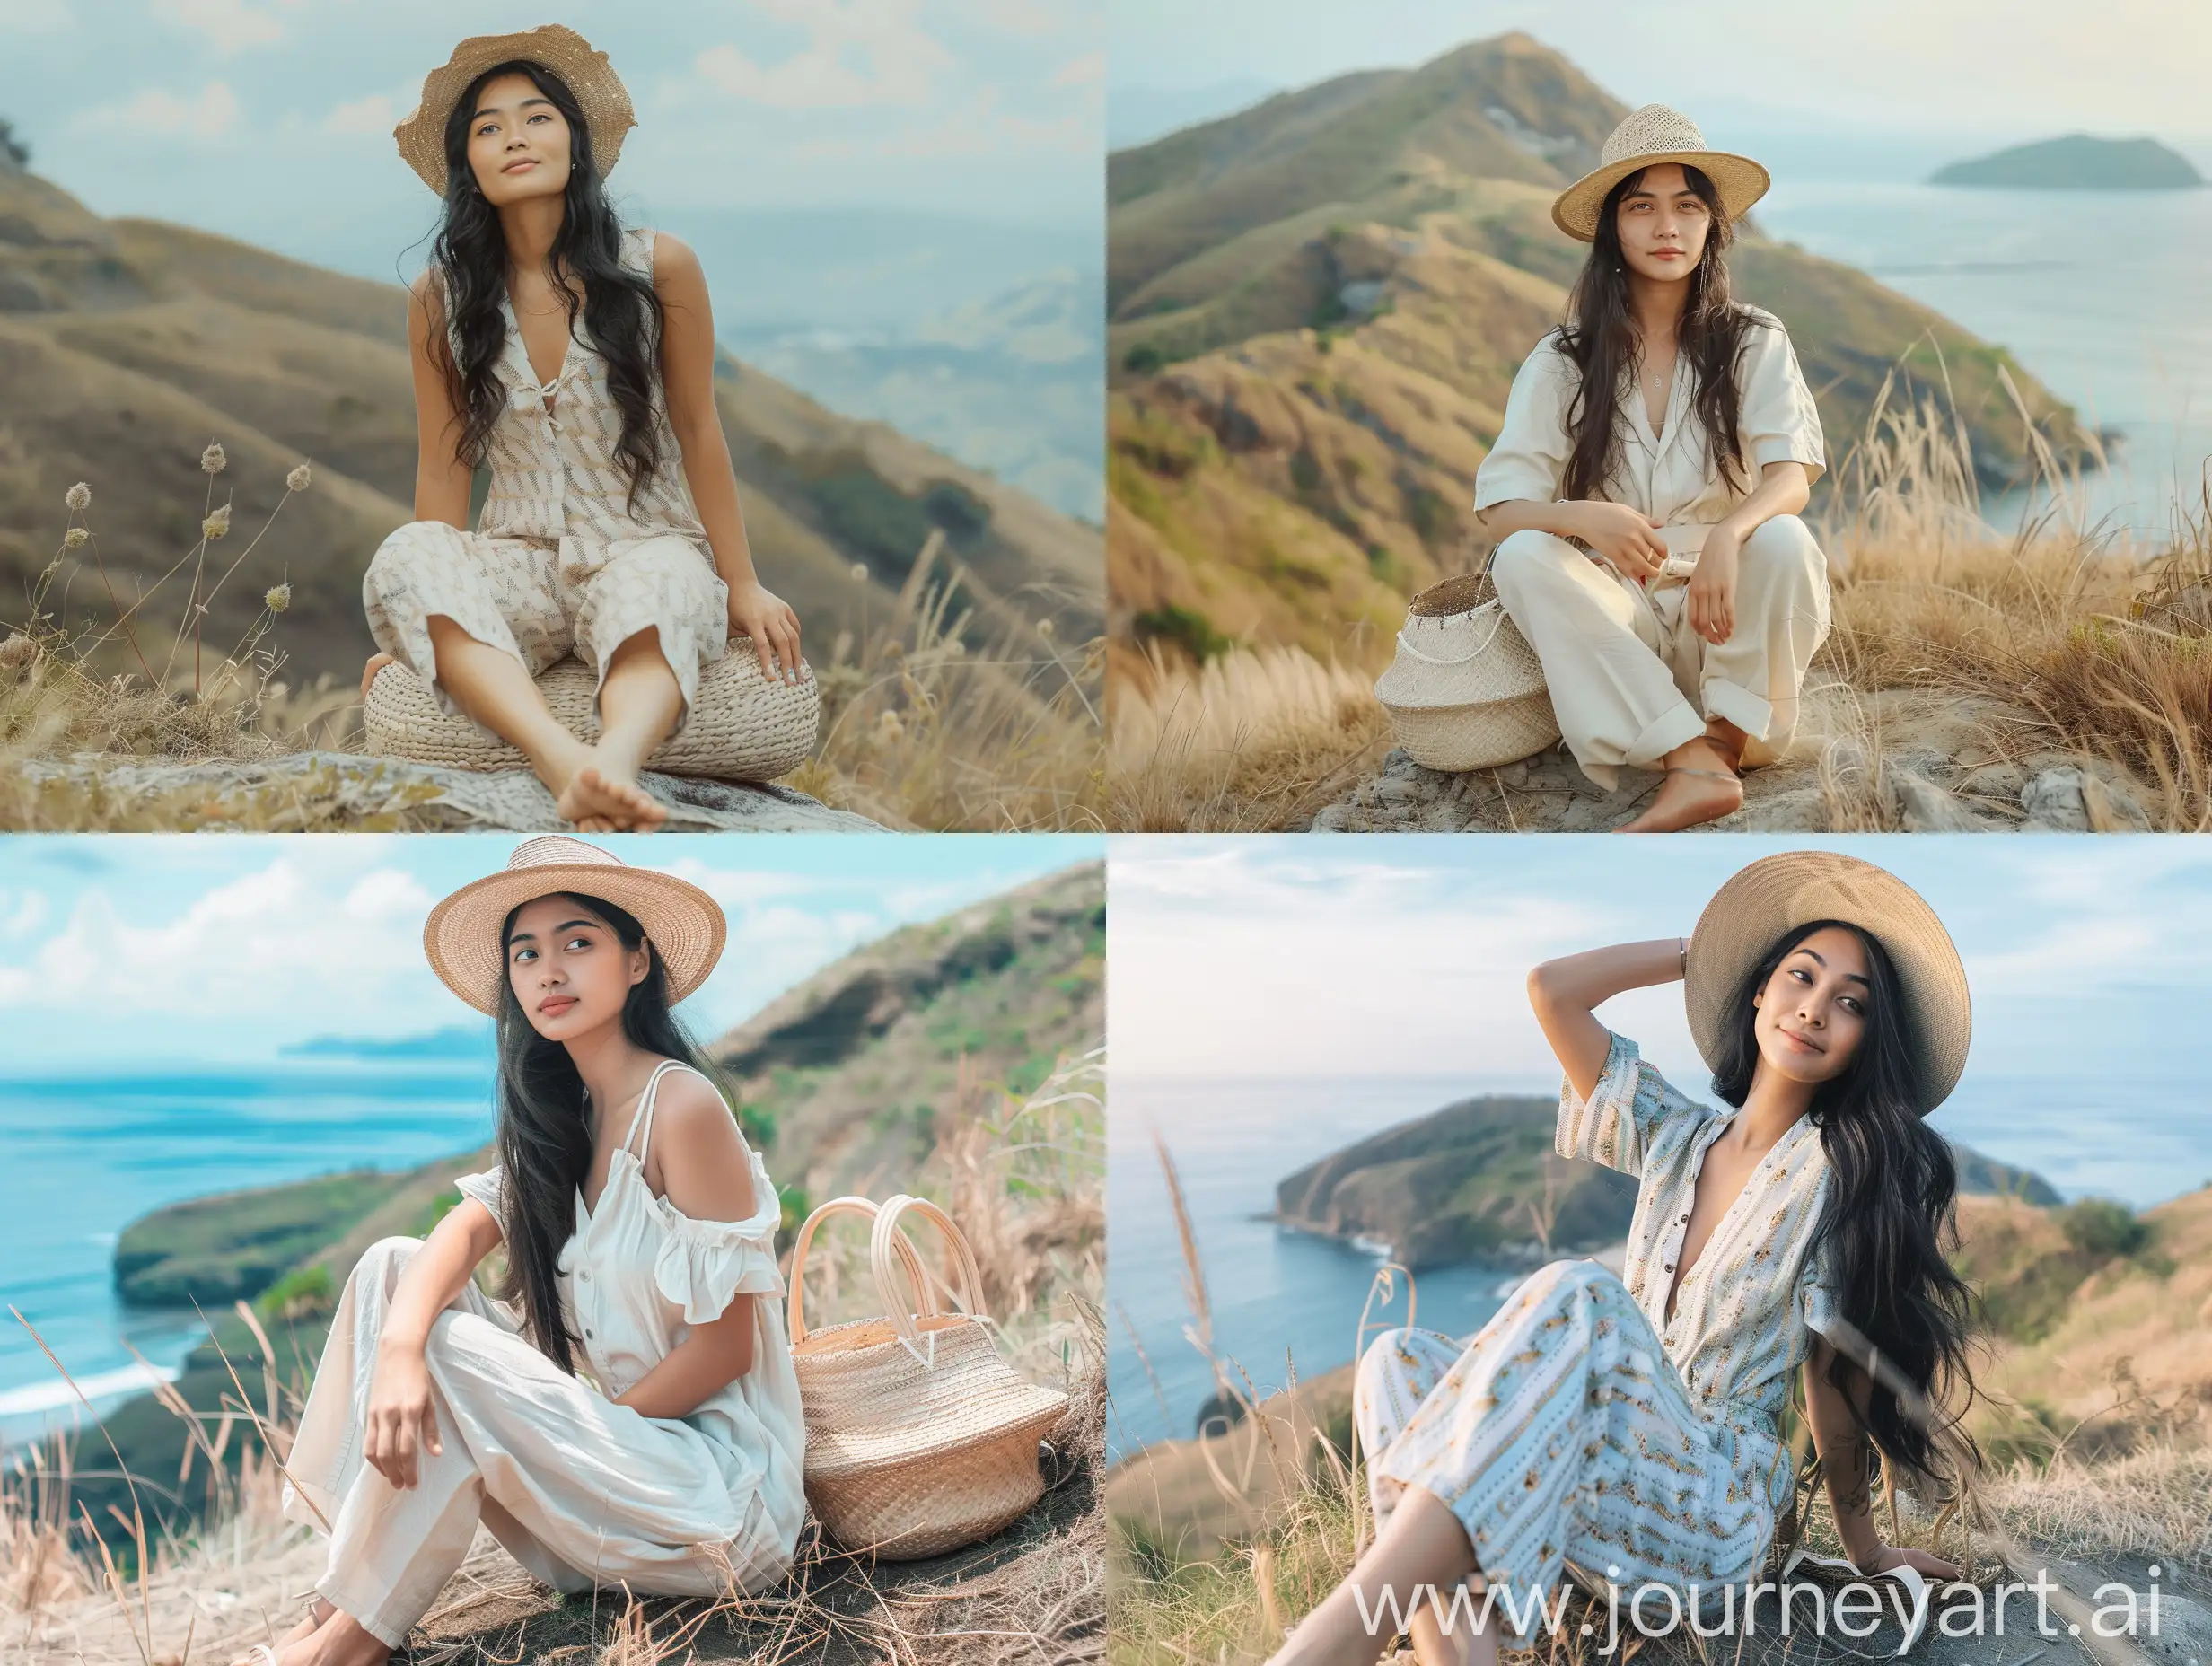 Young-Indonesian-Woman-in-Jumpsuit-and-Straw-Hat-Overlooking-Scenic-Sea-View